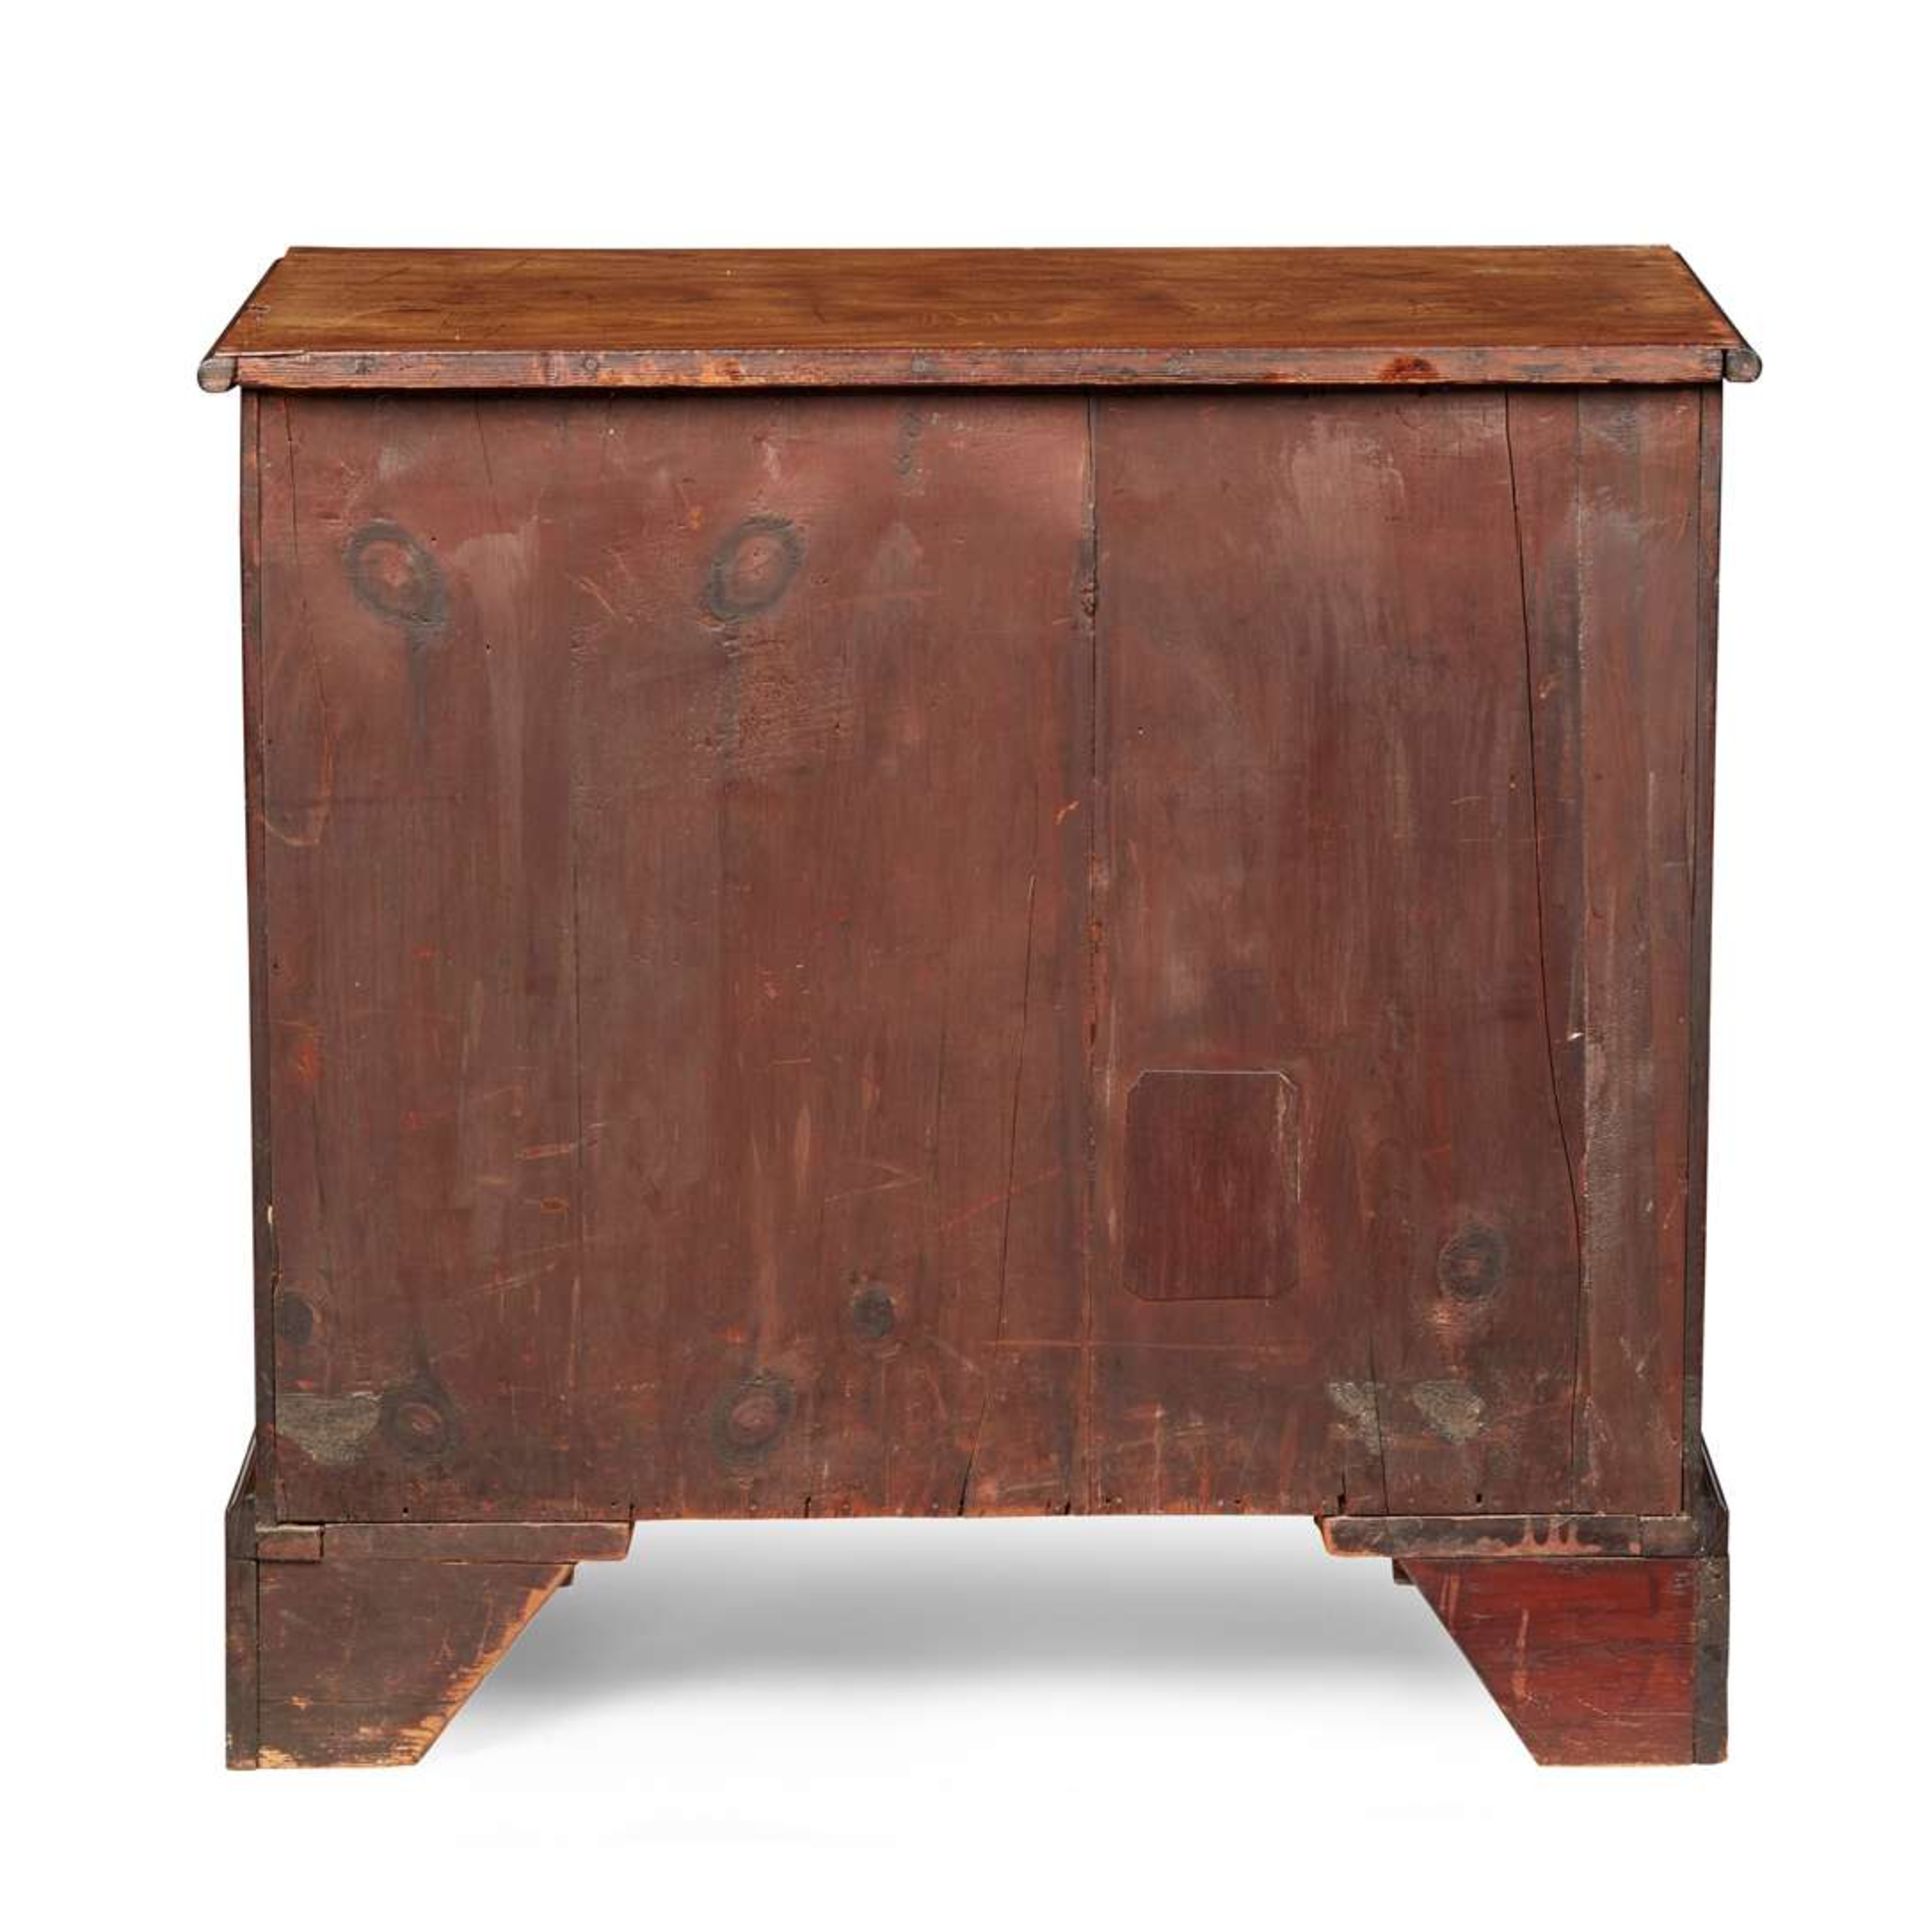 GEORGE III MAHOGANY SMALL CHEST OF DRAWERS - Image 3 of 3